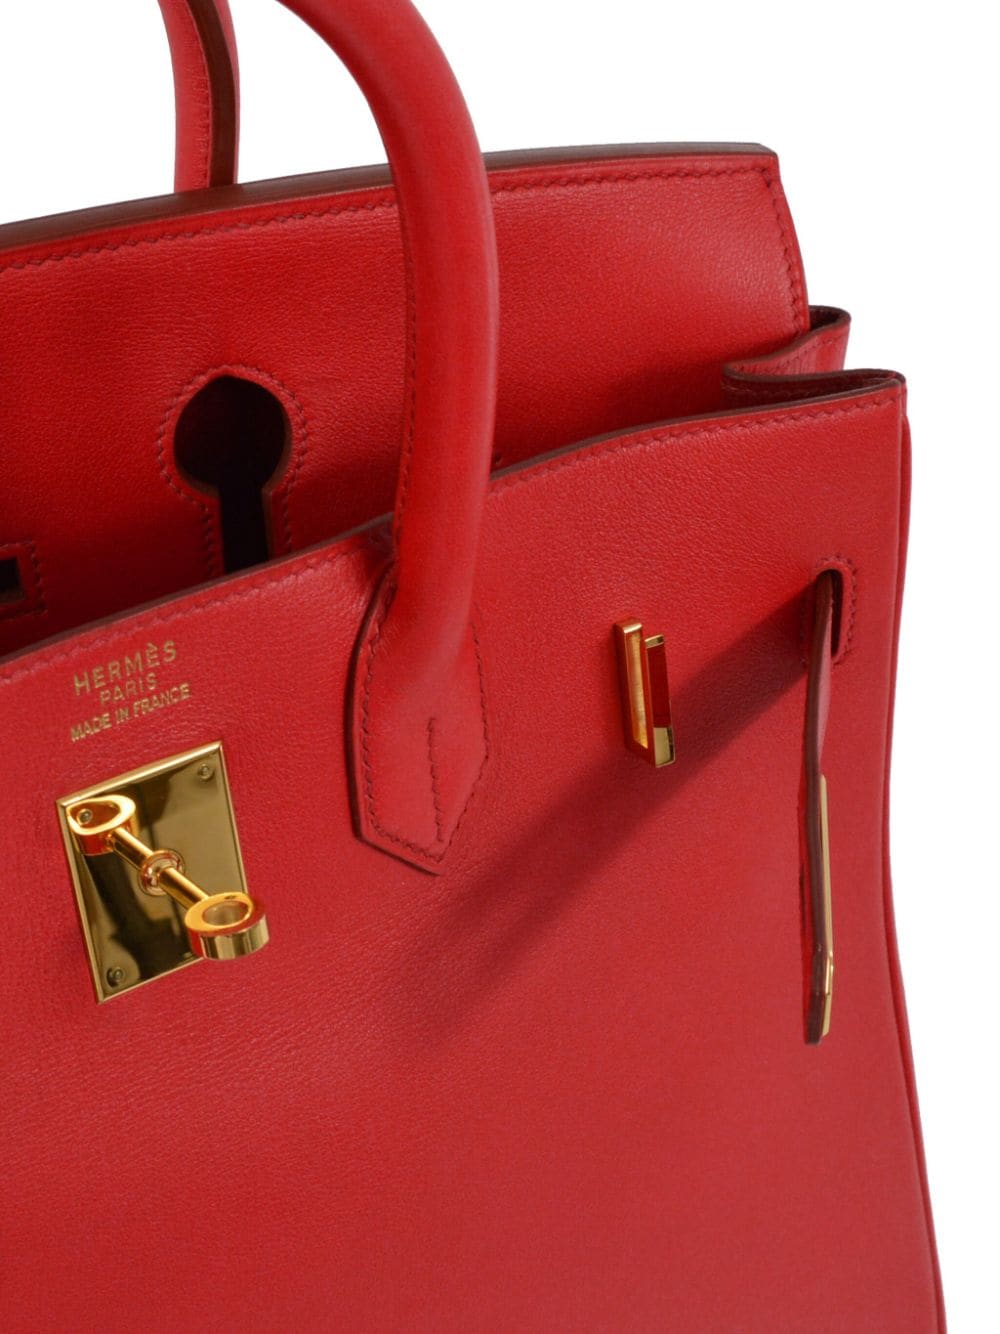 Pre-owned Hermes 1999 Haut À Courroies Handbag In Red